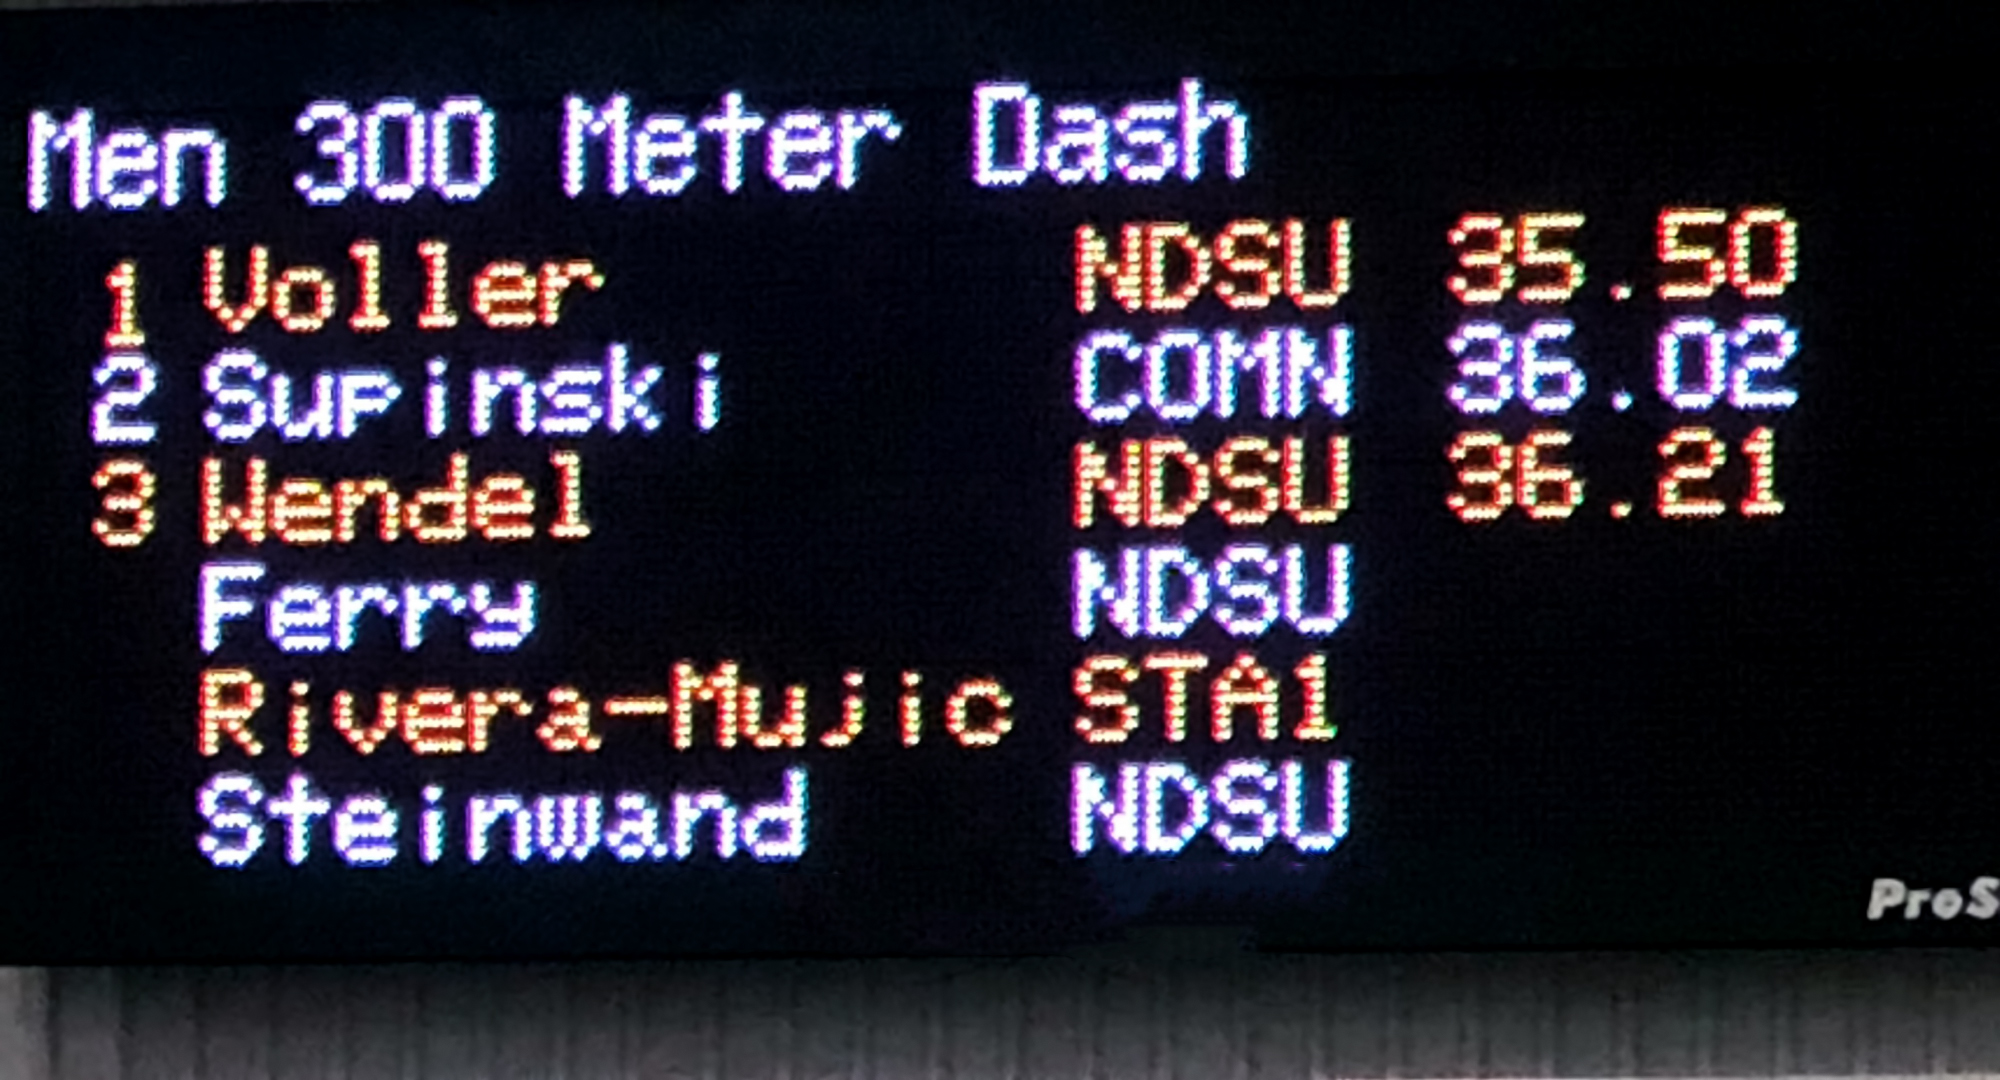 The scoreboard at NDSU flashed the time of David Supinski which was a new school record.